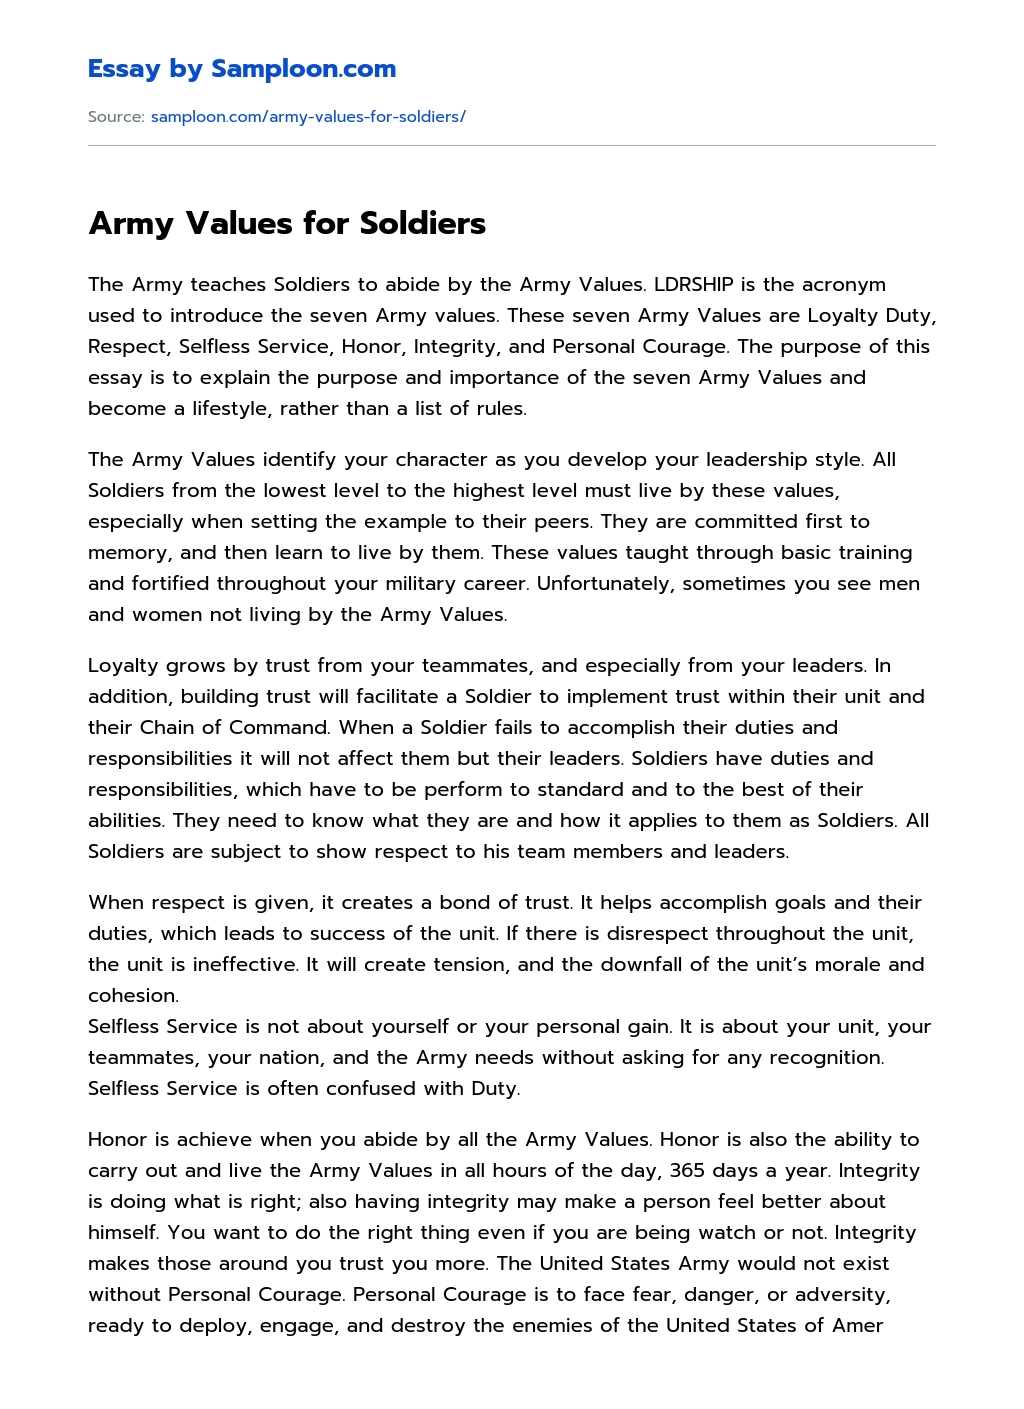 Army Values for Soldiers essay